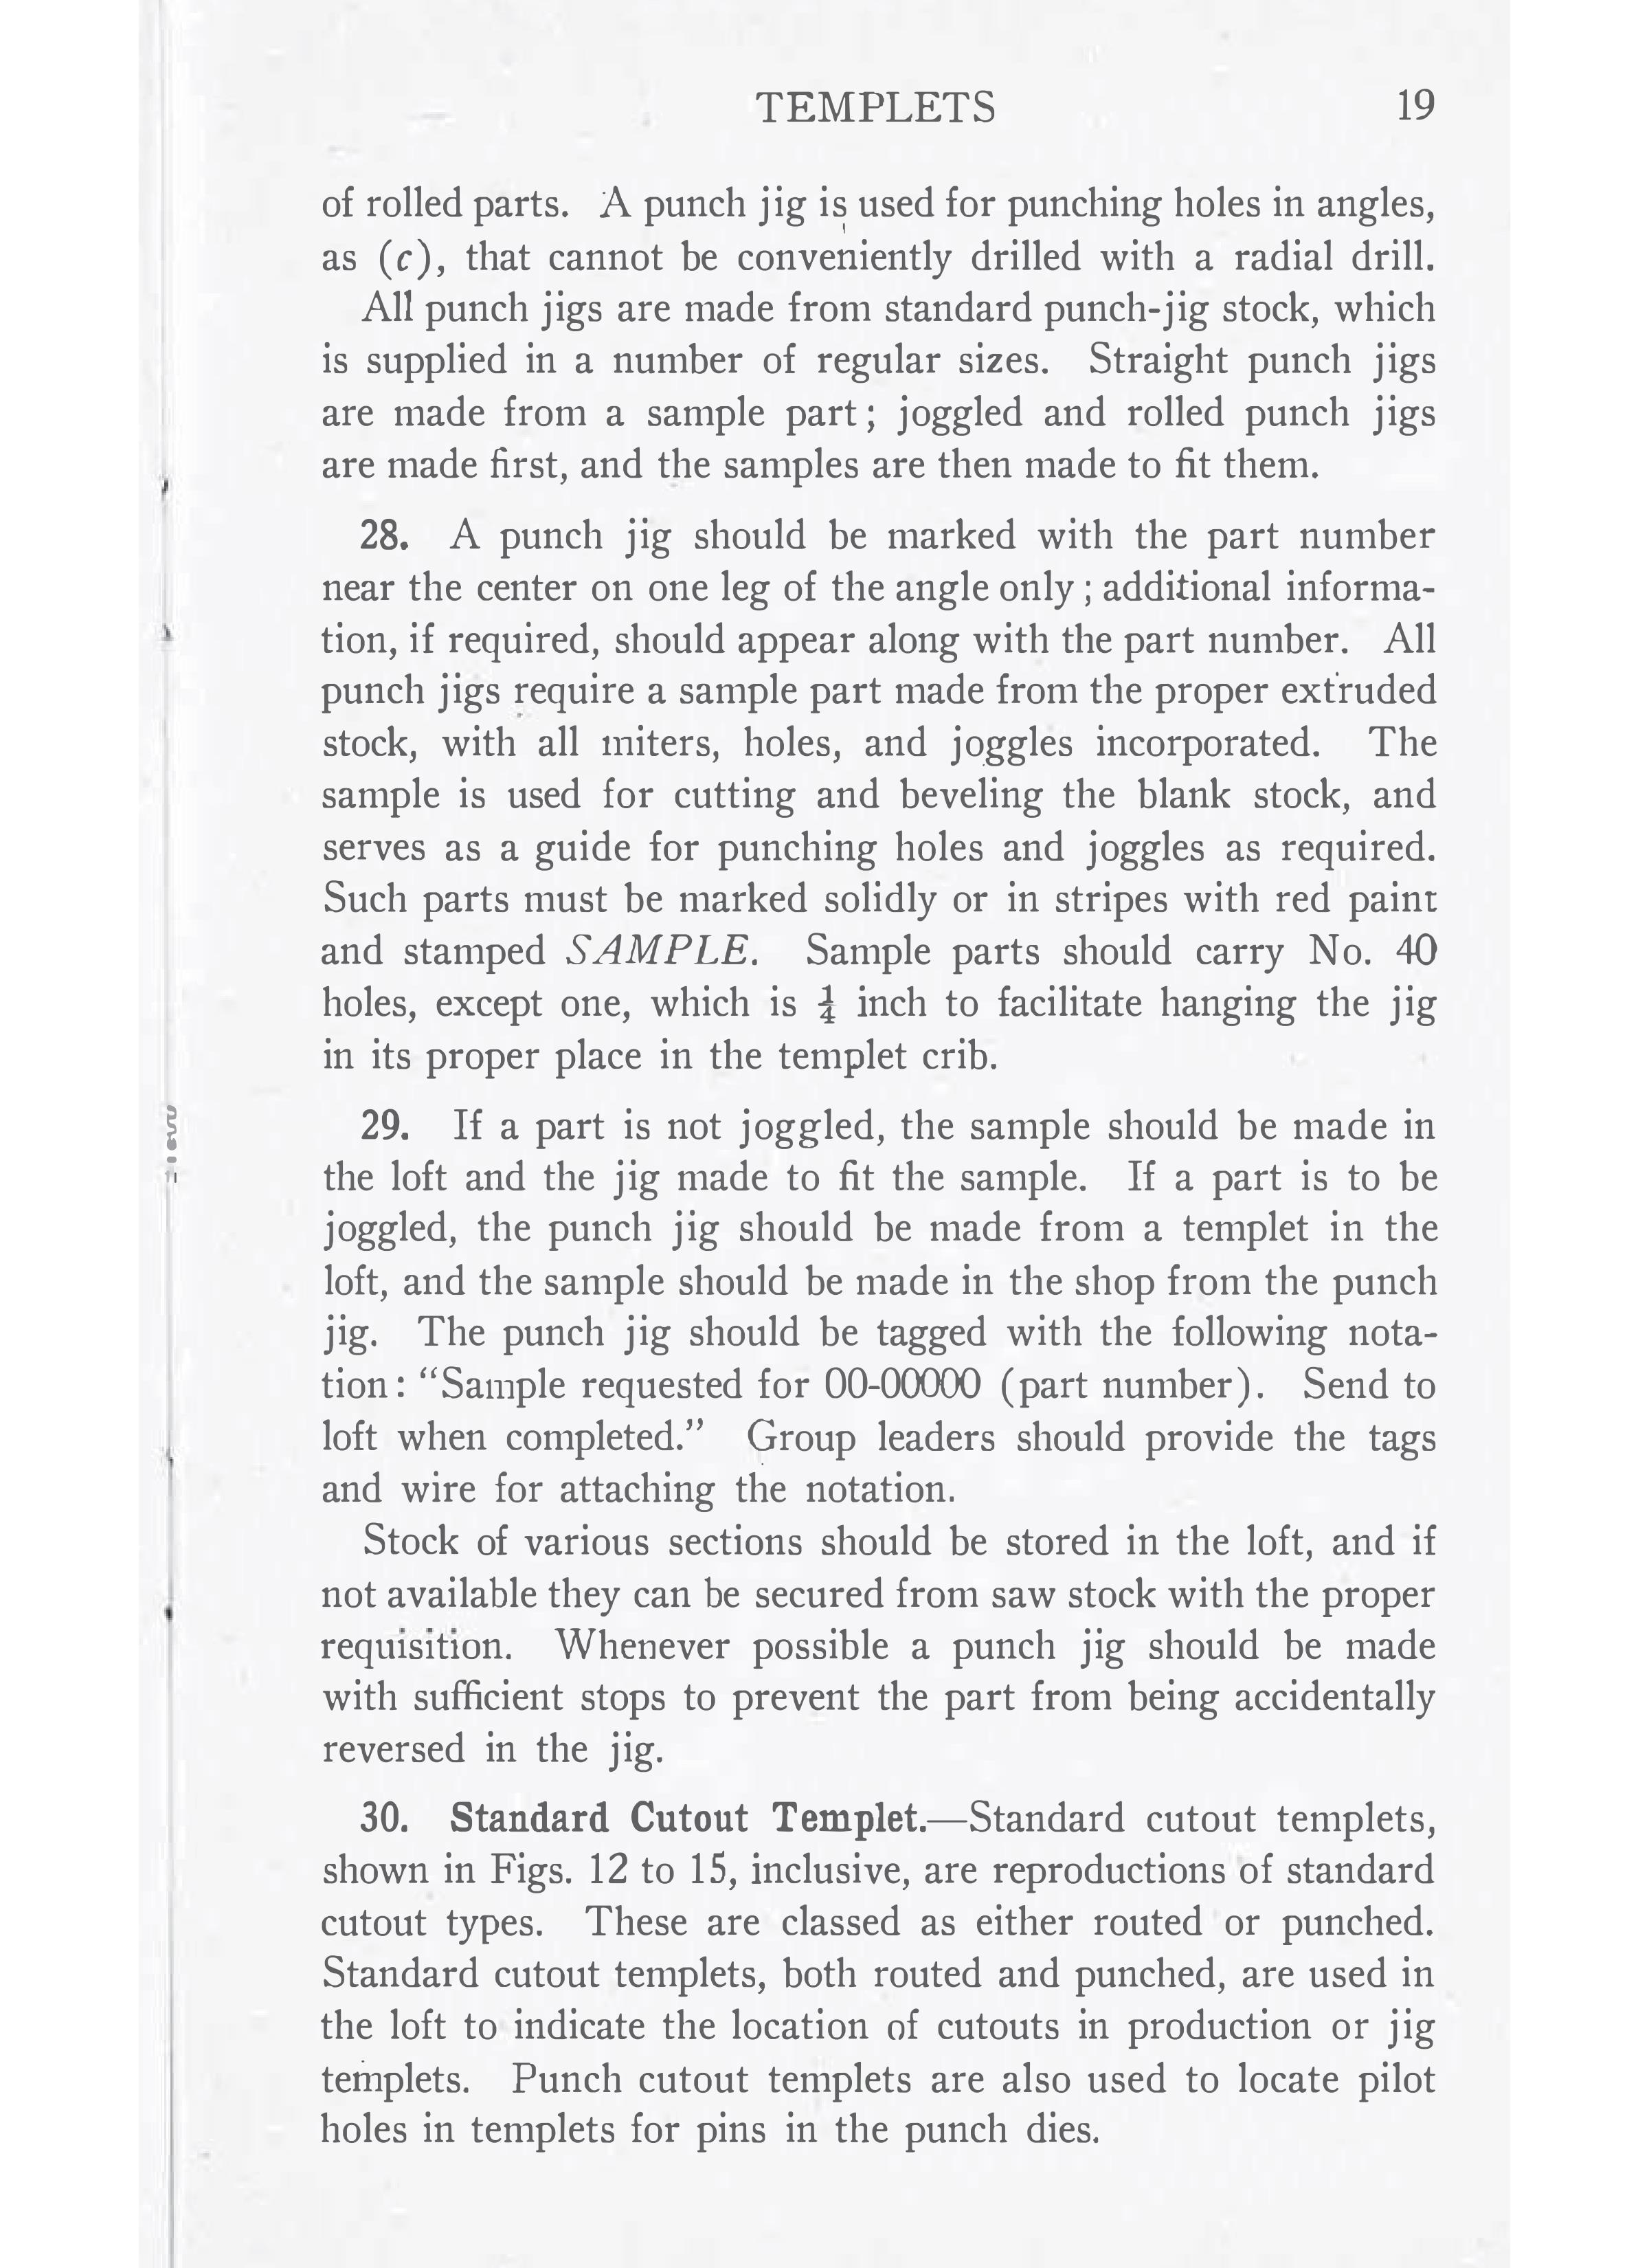 Sample page 21 from AirCorps Library document: Aircraft Tooling - Templets - Bureau of Aeronautics